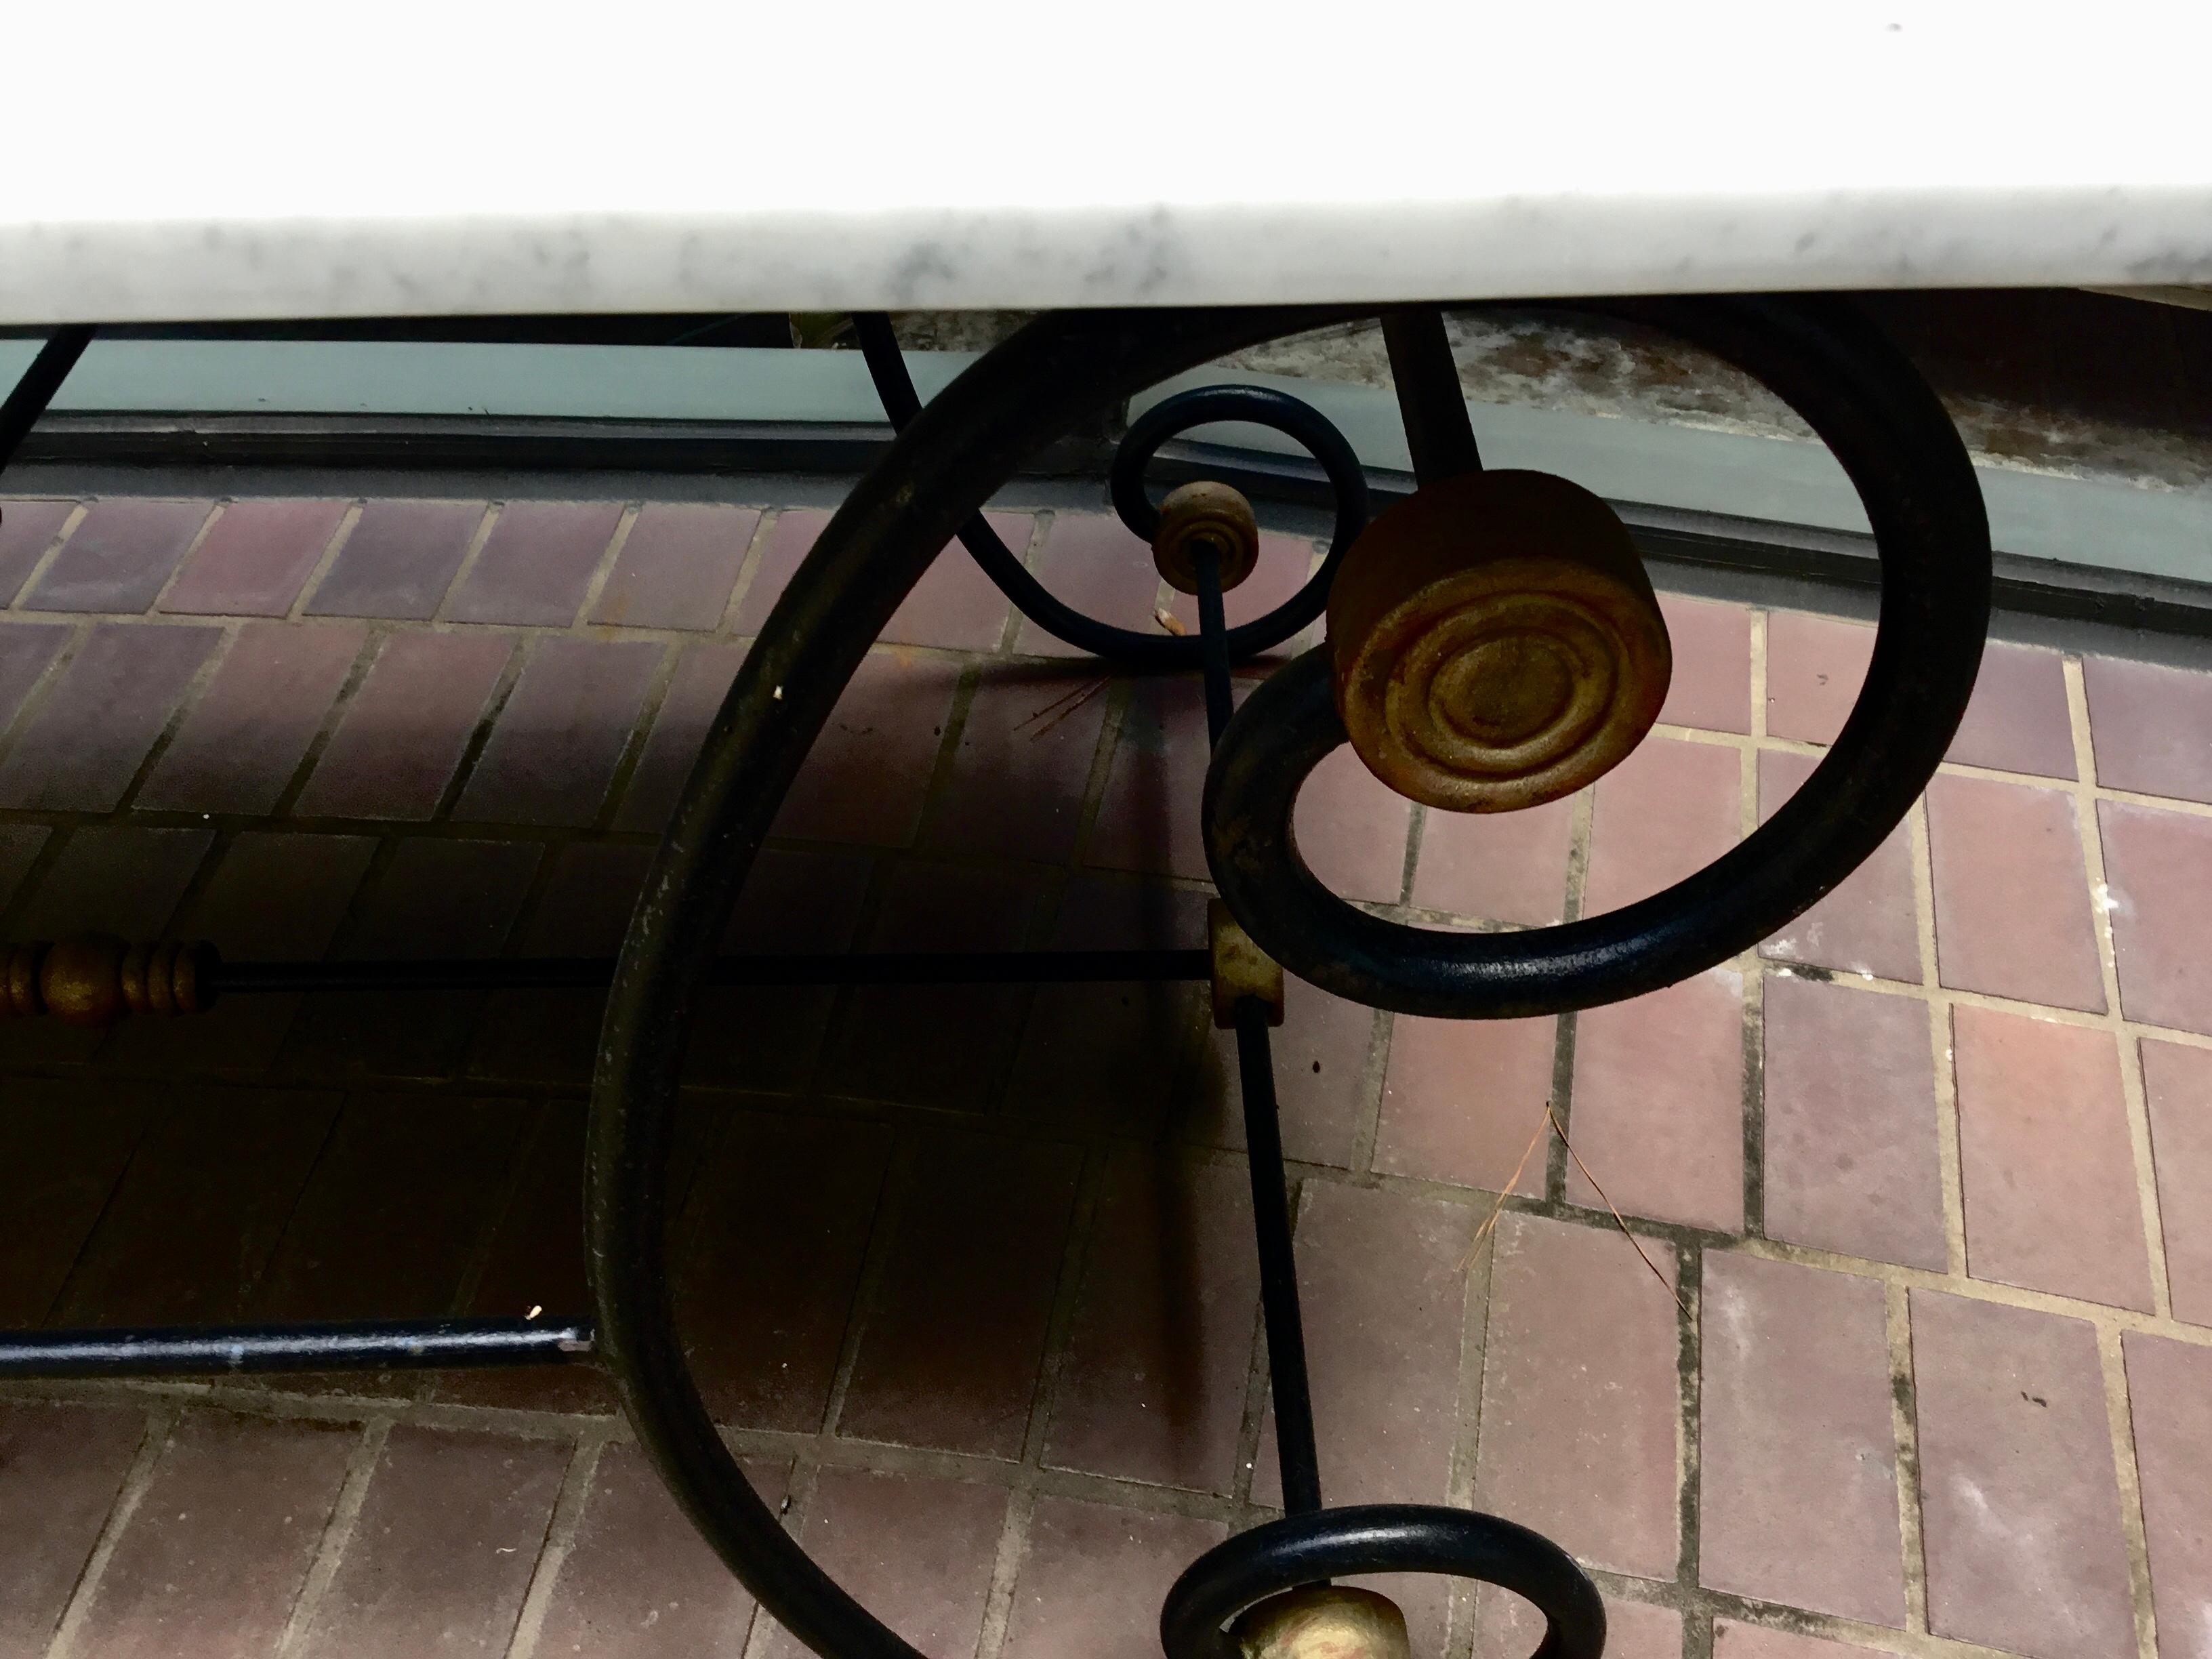 French bakers table with white marble top. Great for kitchen use or on the patio for serving.
White marble top has light gray veins. The iron work has beautiful scrolling legs and design work
With gilt joints.